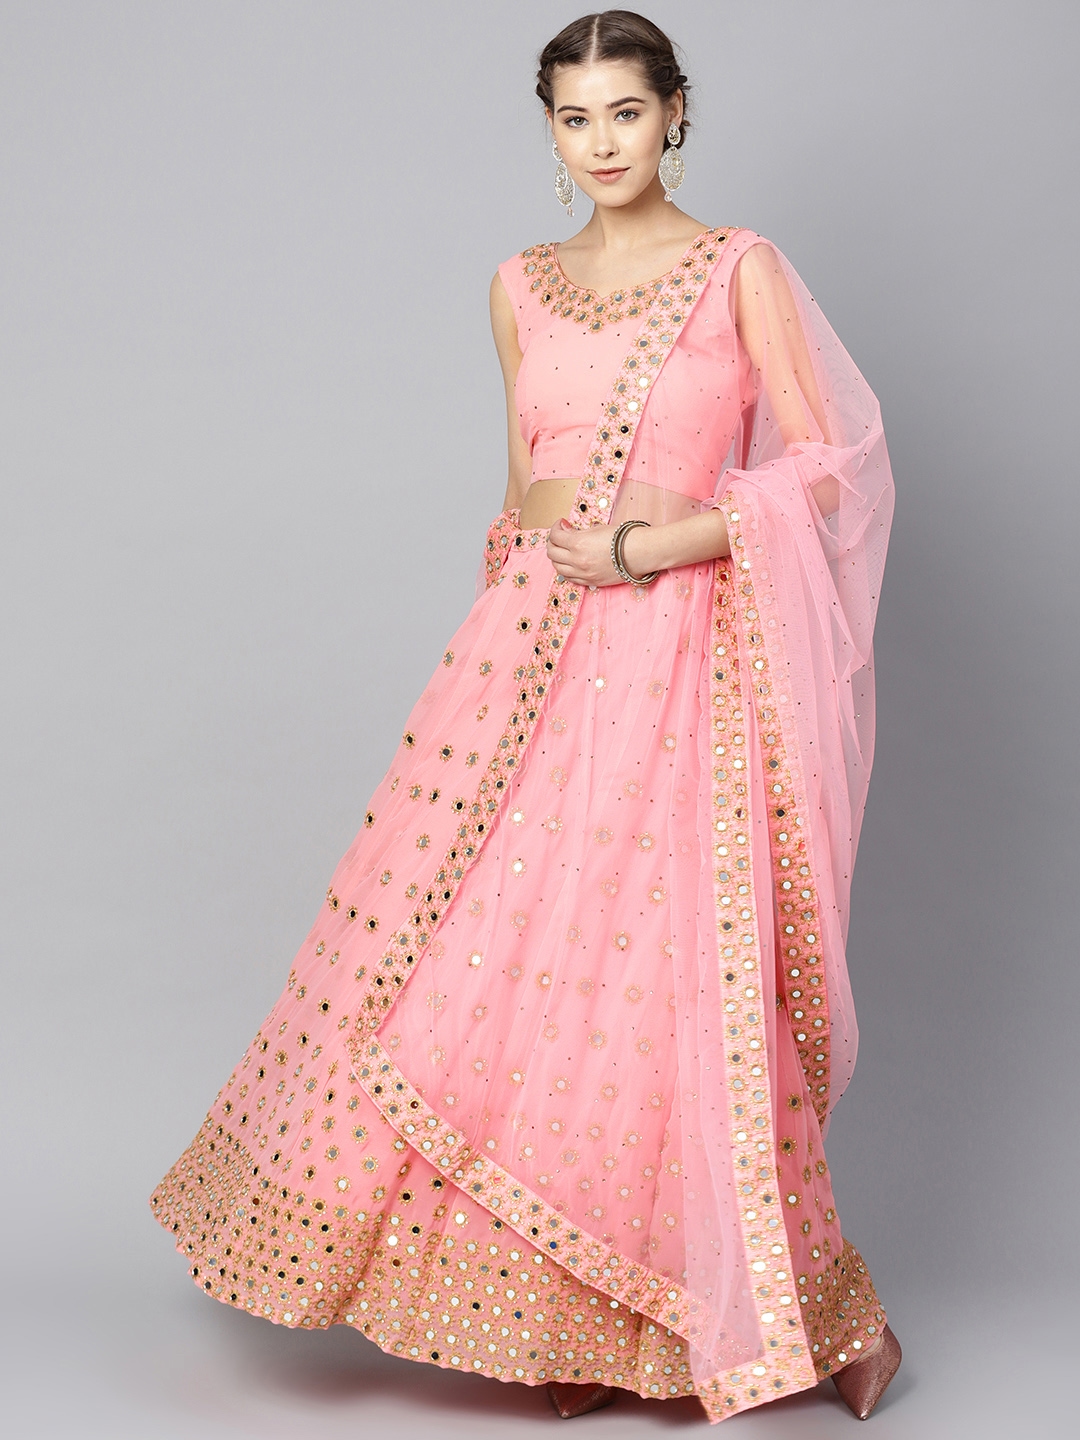 A head-covering one, and a diagonal one resembling a pleated saree pallu